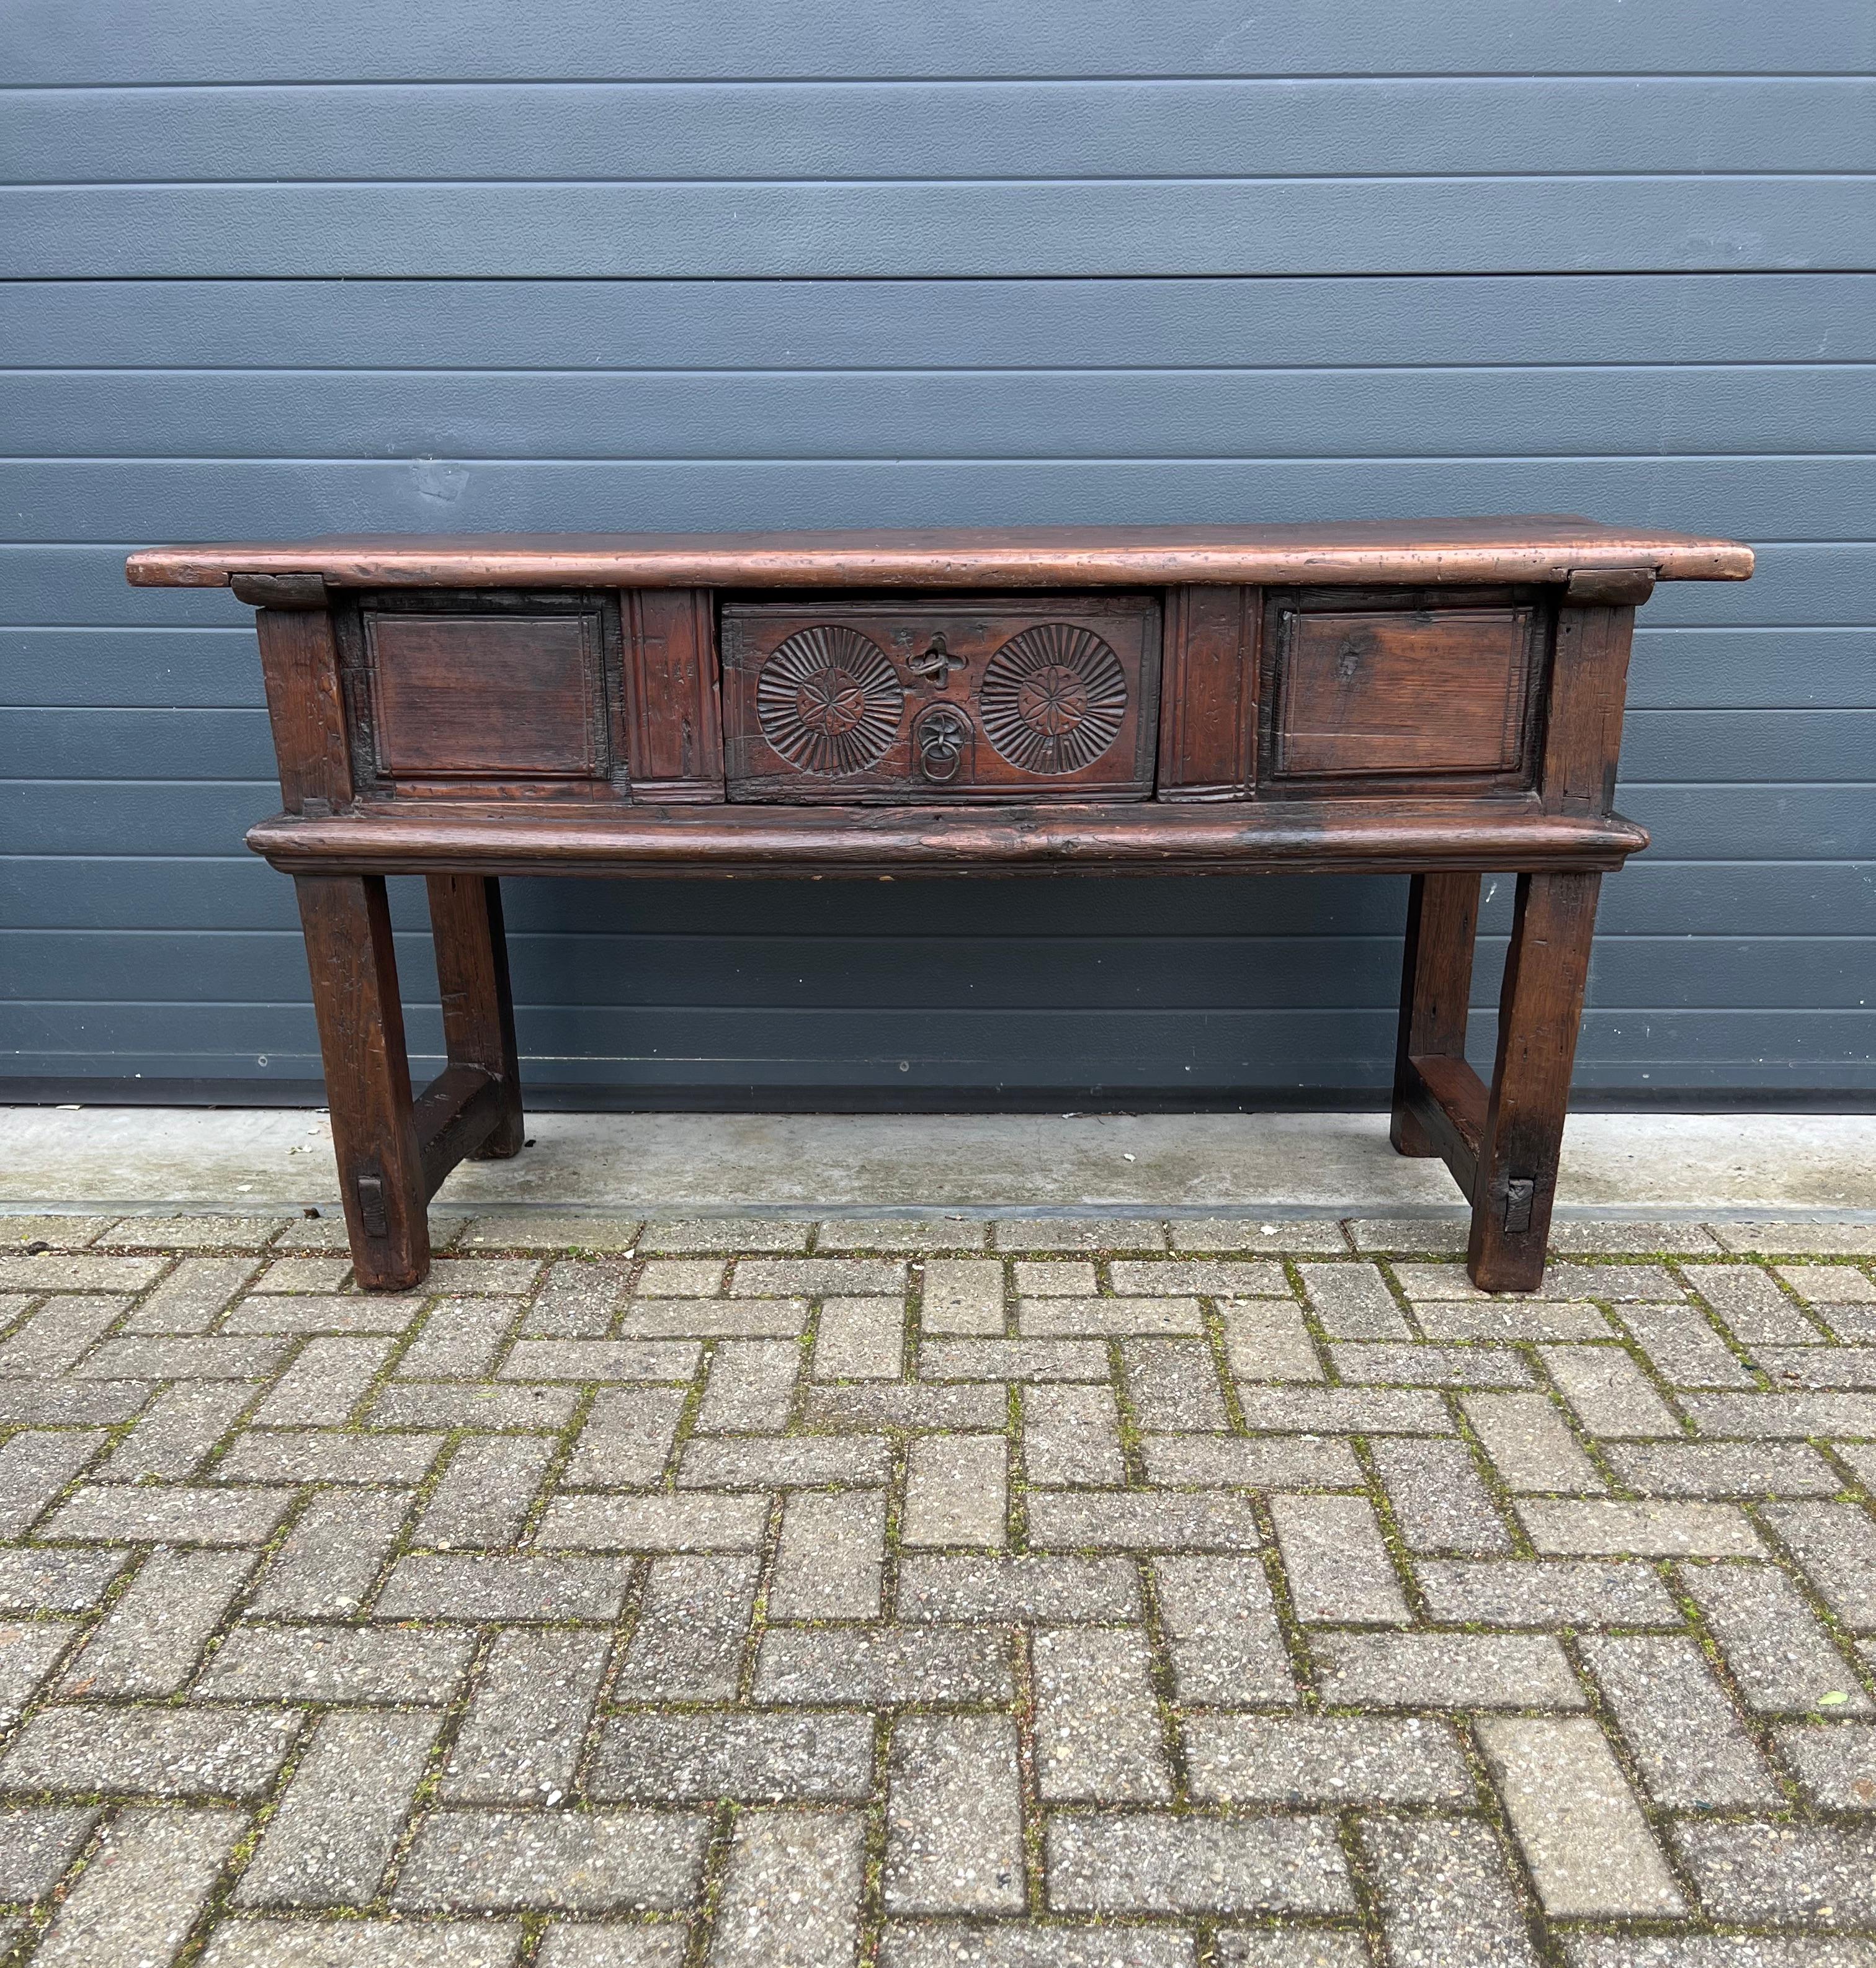 Beautifully time worn, mid to early 18th century side table with drawer.

If you are looking for a truly ancient looking and crudely stylish side table to decorate your living room or entry hall then this rare antique specimen could be flying your